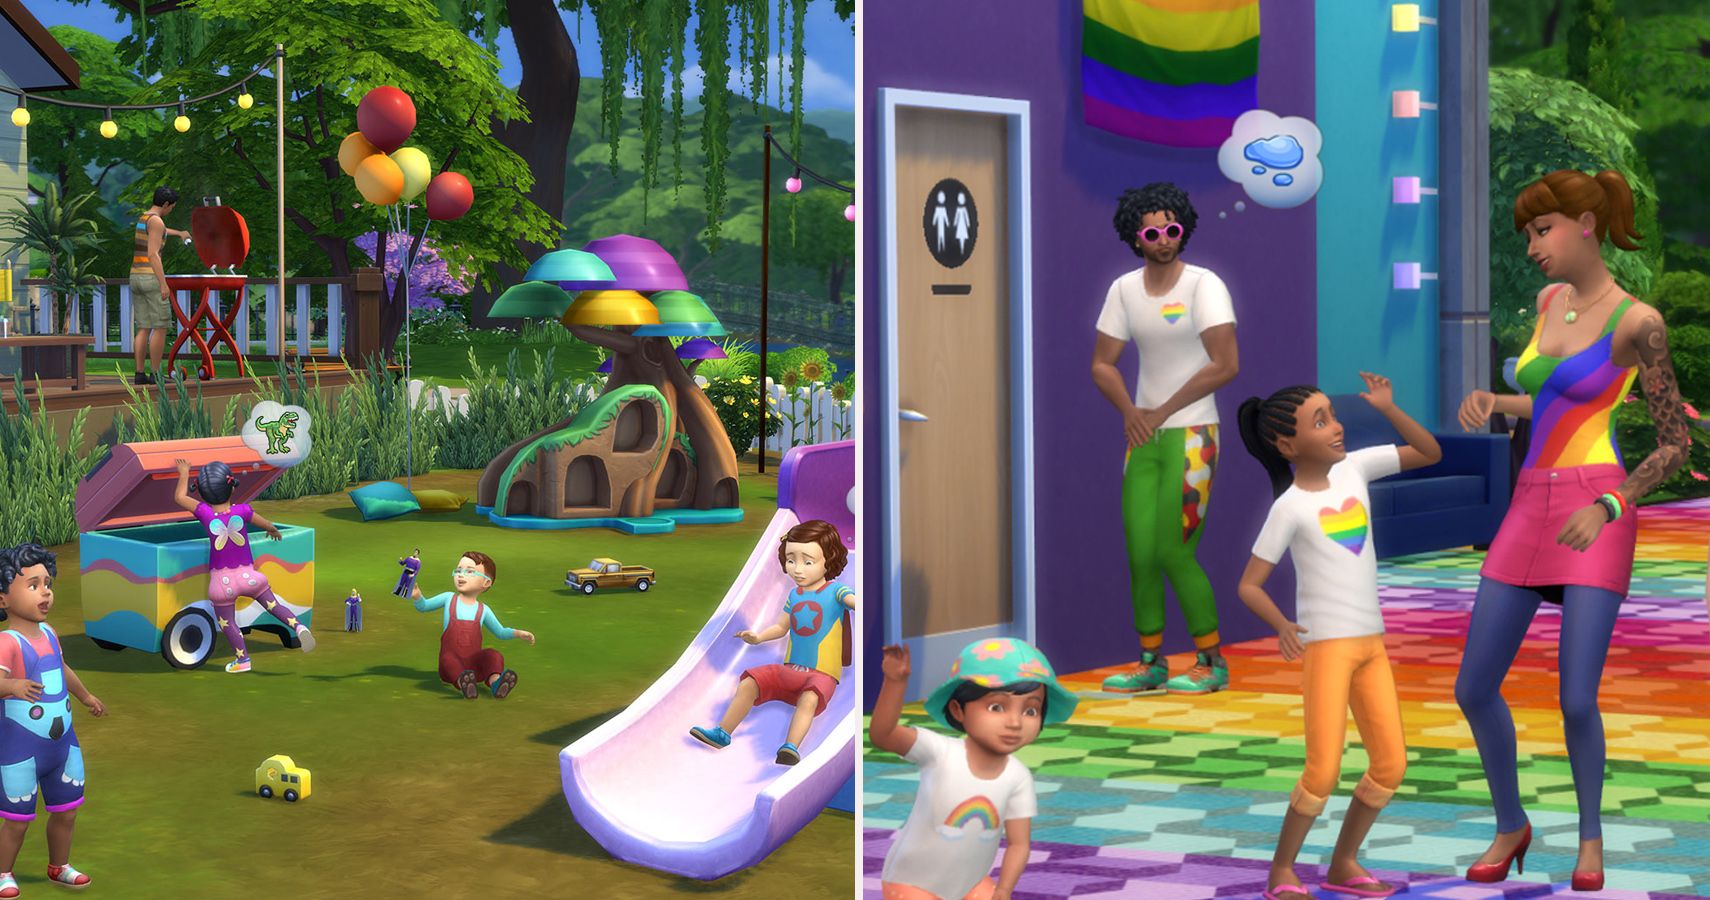 The Sims 4 base game will be free to play in just a few weeks